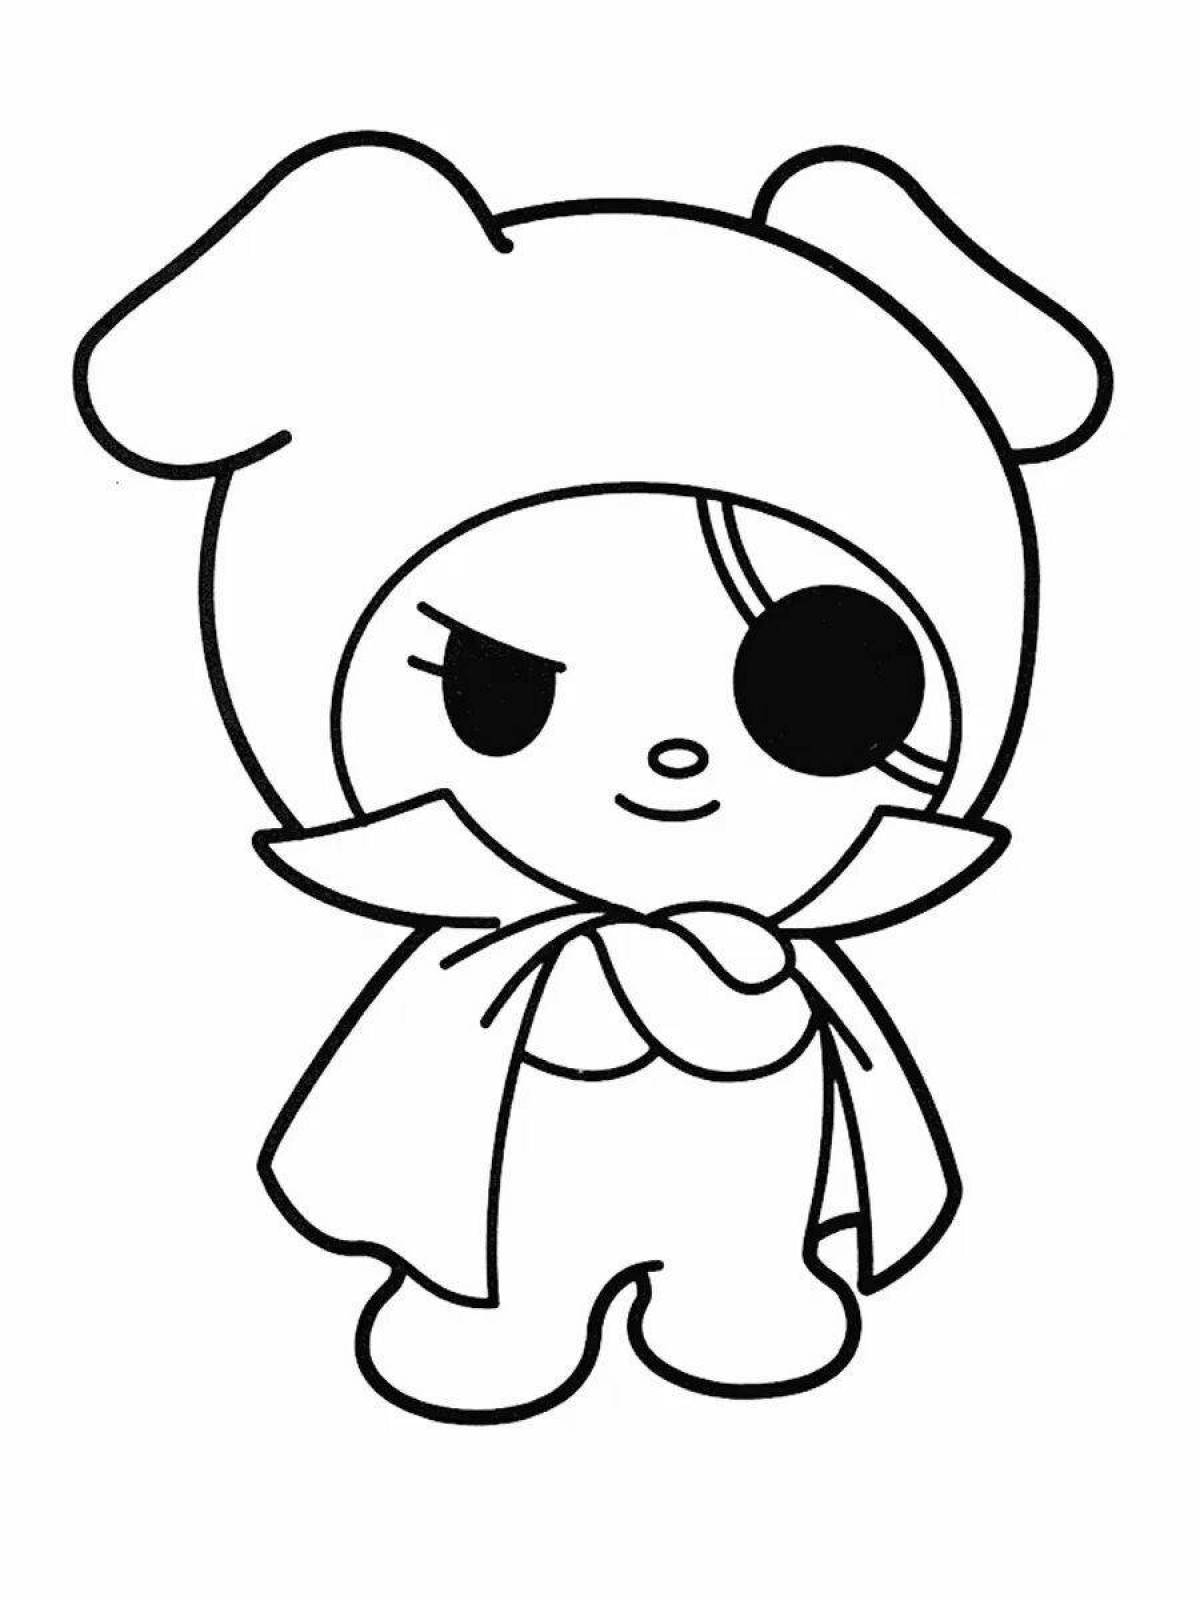 Happy May melody hello kitty coloring page